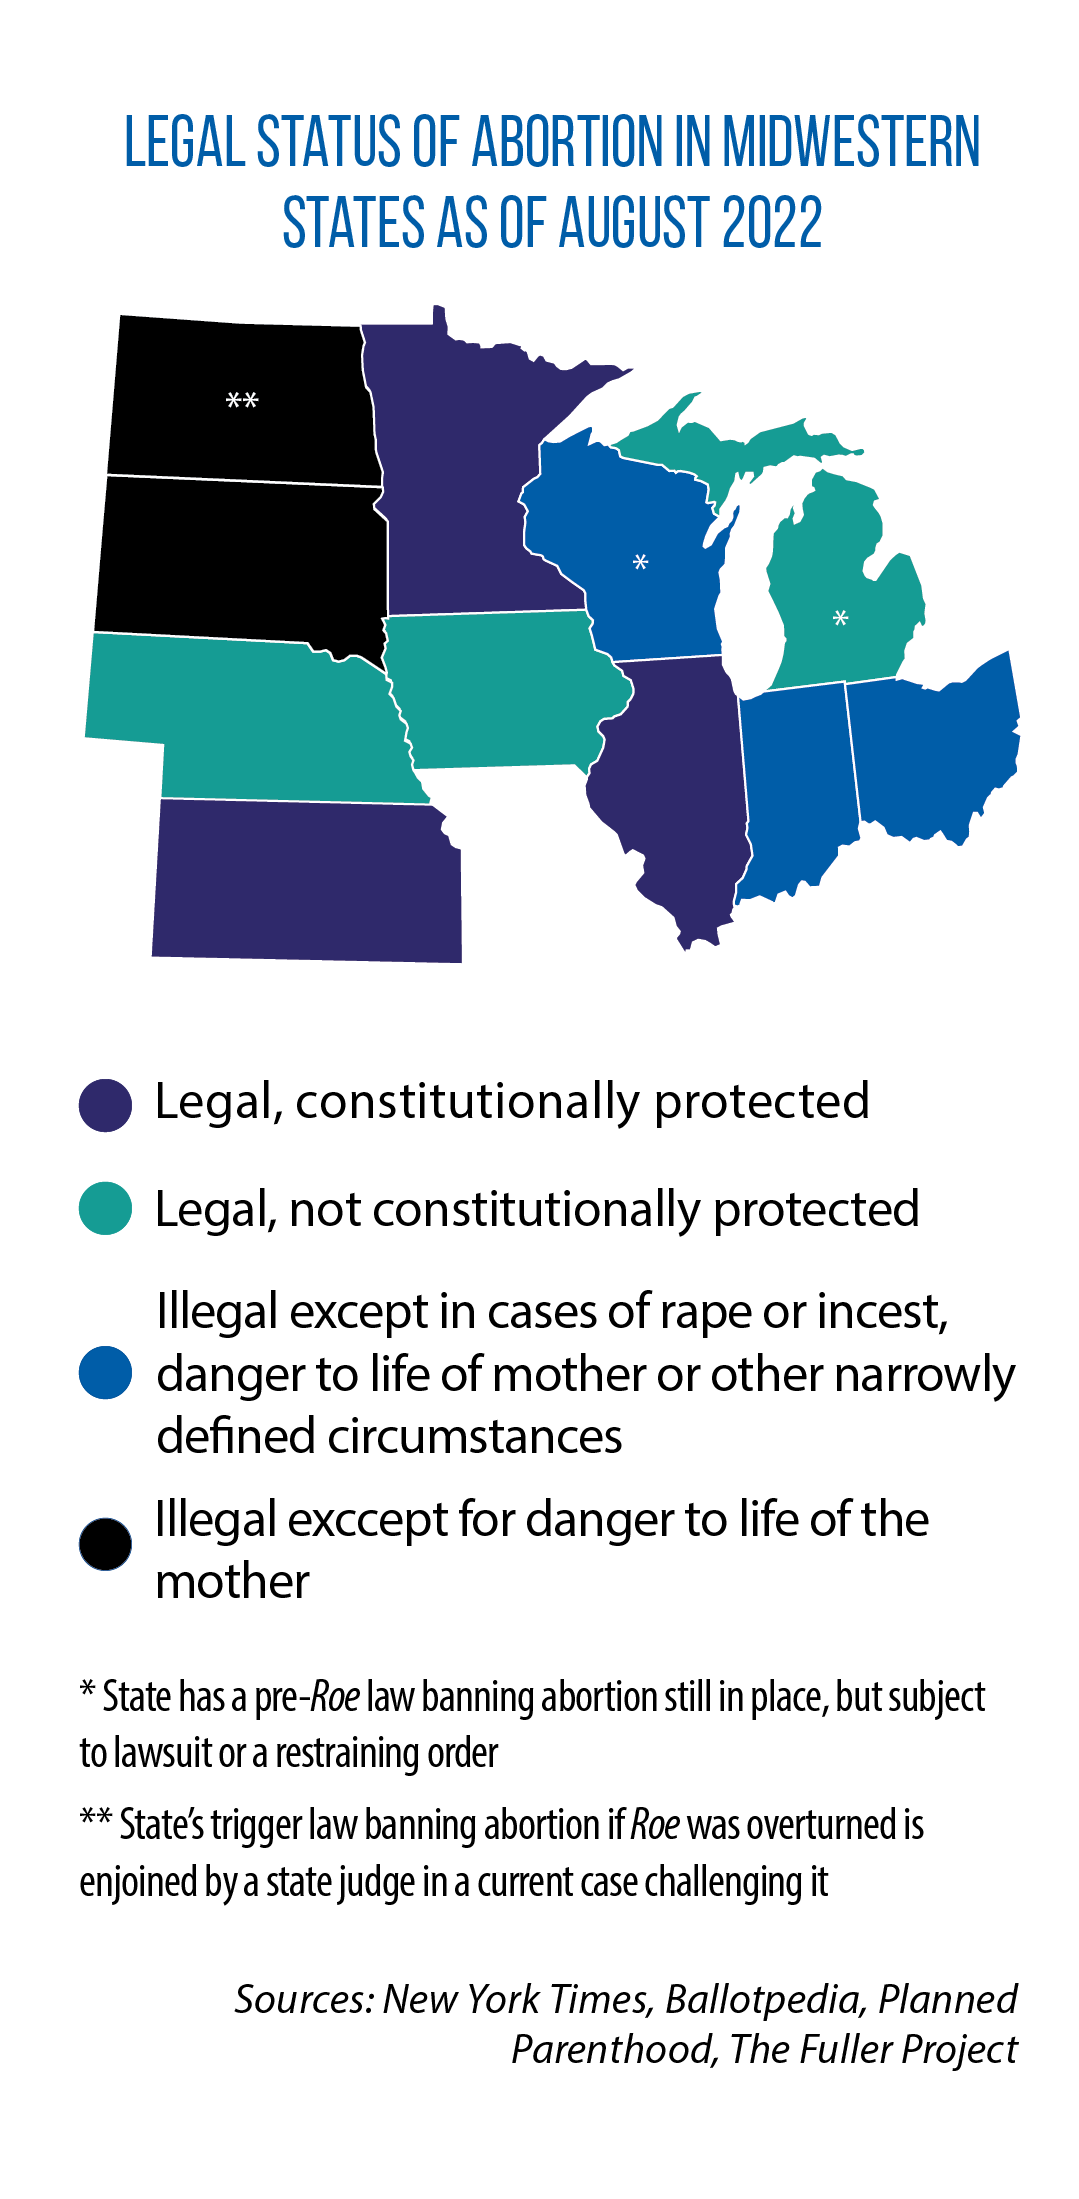 Map showing legal status of abortion access in Midwestern states as of August 2022